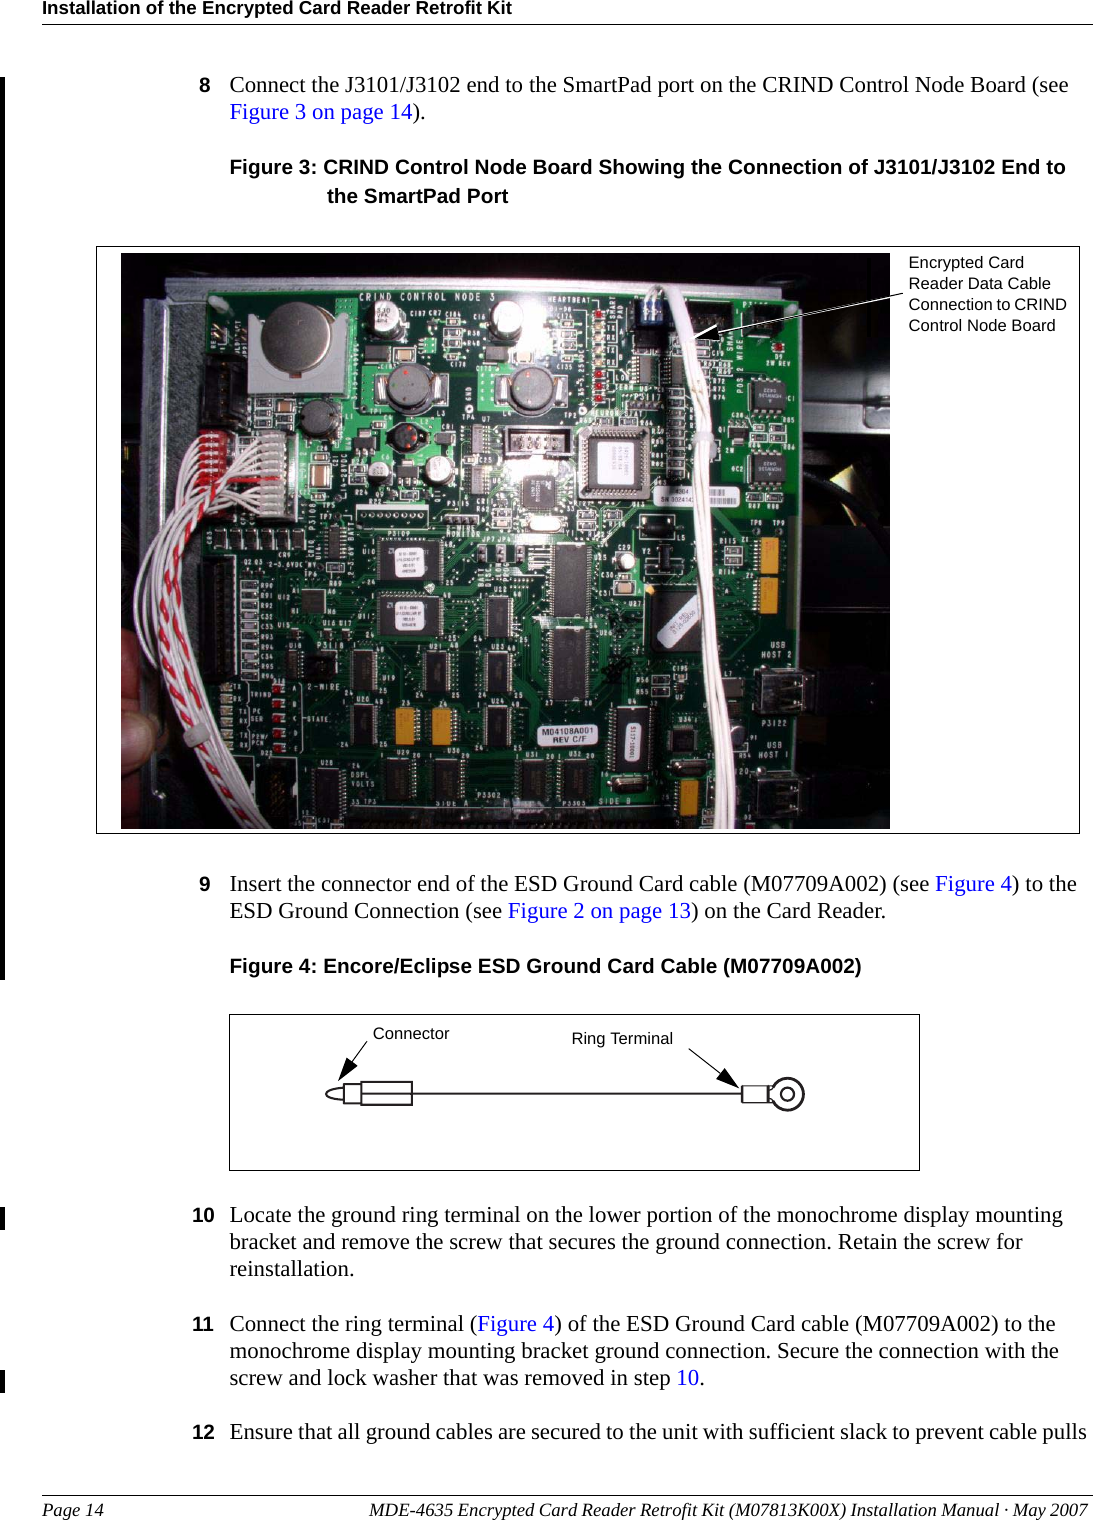 Installation of the Encrypted Card Reader Retrofit KitPage 14 MDE-4635 Encrypted Card Reader Retrofit Kit (M07813K00X) Installation Manual · May 2007 Preliminary8Connect the J3101/J3102 end to the SmartPad port on the CRIND Control Node Board (see Figure 3 on page 14).Figure 3: CRIND Control Node Board Showing the Connection of J3101/J3102 End to the SmartPad PortEncrypted Card Reader Data Cable Connection to CRIND Control Node Board9Insert the connector end of the ESD Ground Card cable (M07709A002) (see Figure 4) to the ESD Ground Connection (see Figure 2 on page 13) on the Card Reader.Figure 4: Encore/Eclipse ESD Ground Card Cable (M07709A002)Ring TerminalConnector10 Locate the ground ring terminal on the lower portion of the monochrome display mounting bracket and remove the screw that secures the ground connection. Retain the screw for reinstallation.11 Connect the ring terminal (Figure 4) of the ESD Ground Card cable (M07709A002) to the monochrome display mounting bracket ground connection. Secure the connection with the screw and lock washer that was removed in step 10.12 Ensure that all ground cables are secured to the unit with sufficient slack to prevent cable pulls 